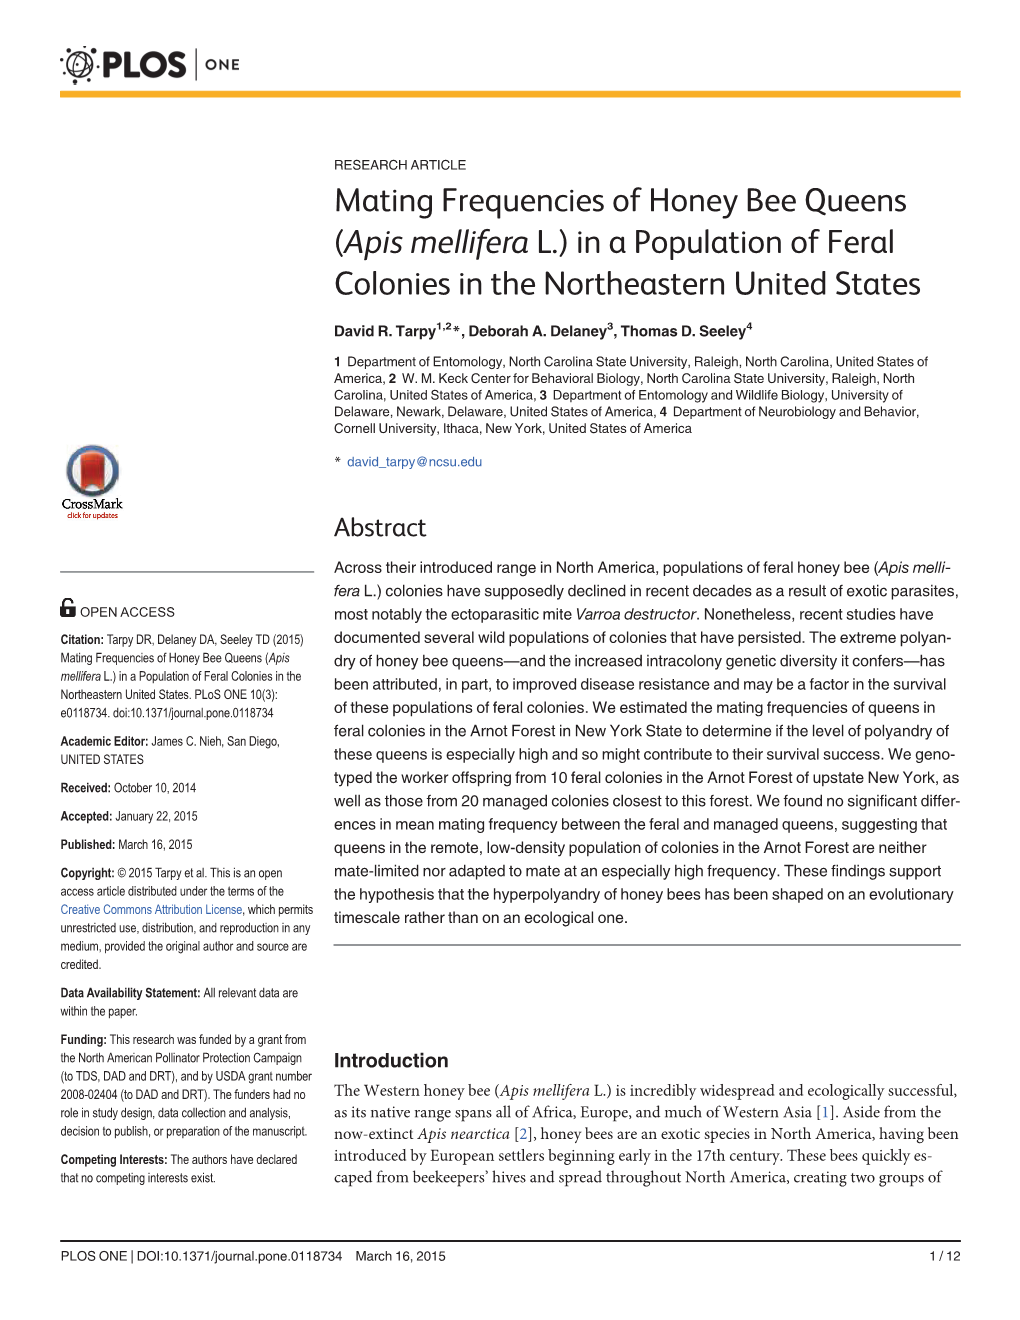 Mating Frequencies of Honey Bee Queens (Apis Mellifera L.) in a Population of Feral Colonies in the Northeastern United States